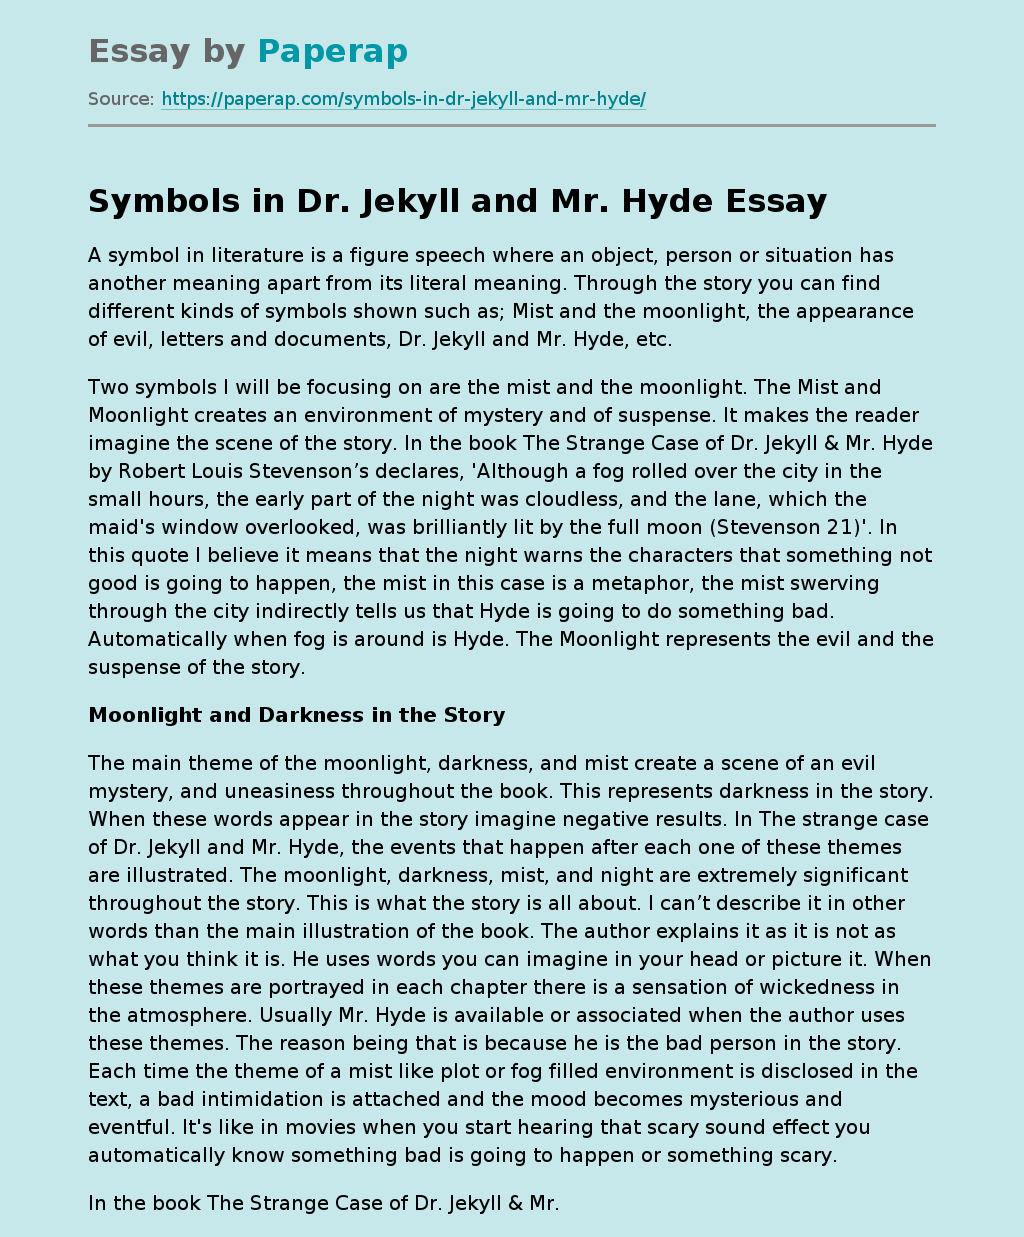 Symbols in Dr. Jekyll and Mr. Hyde